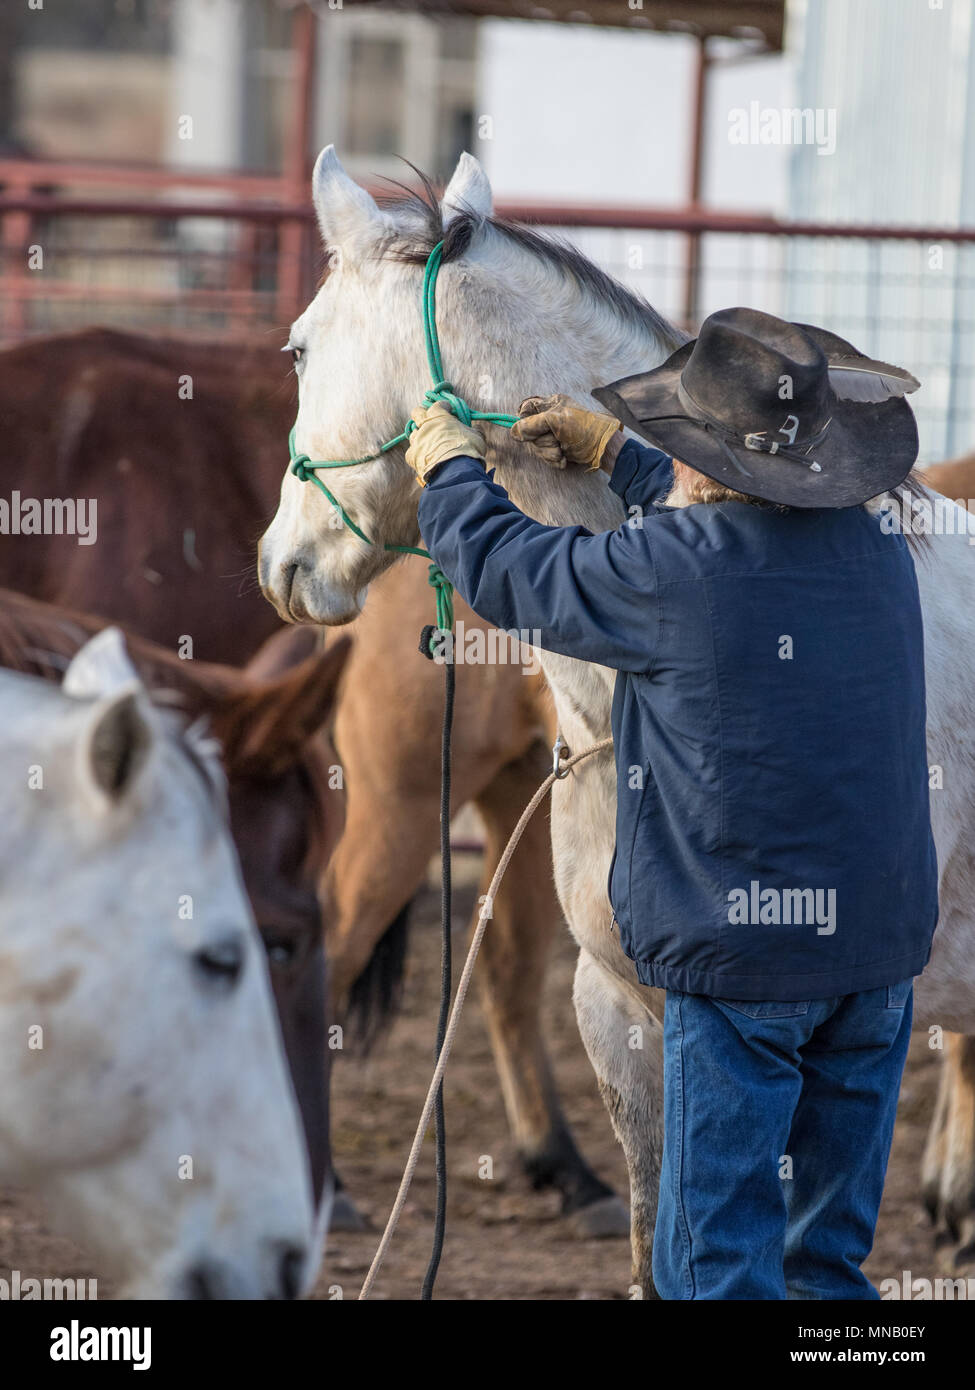 Authentic Working Cowboy Stock Photo